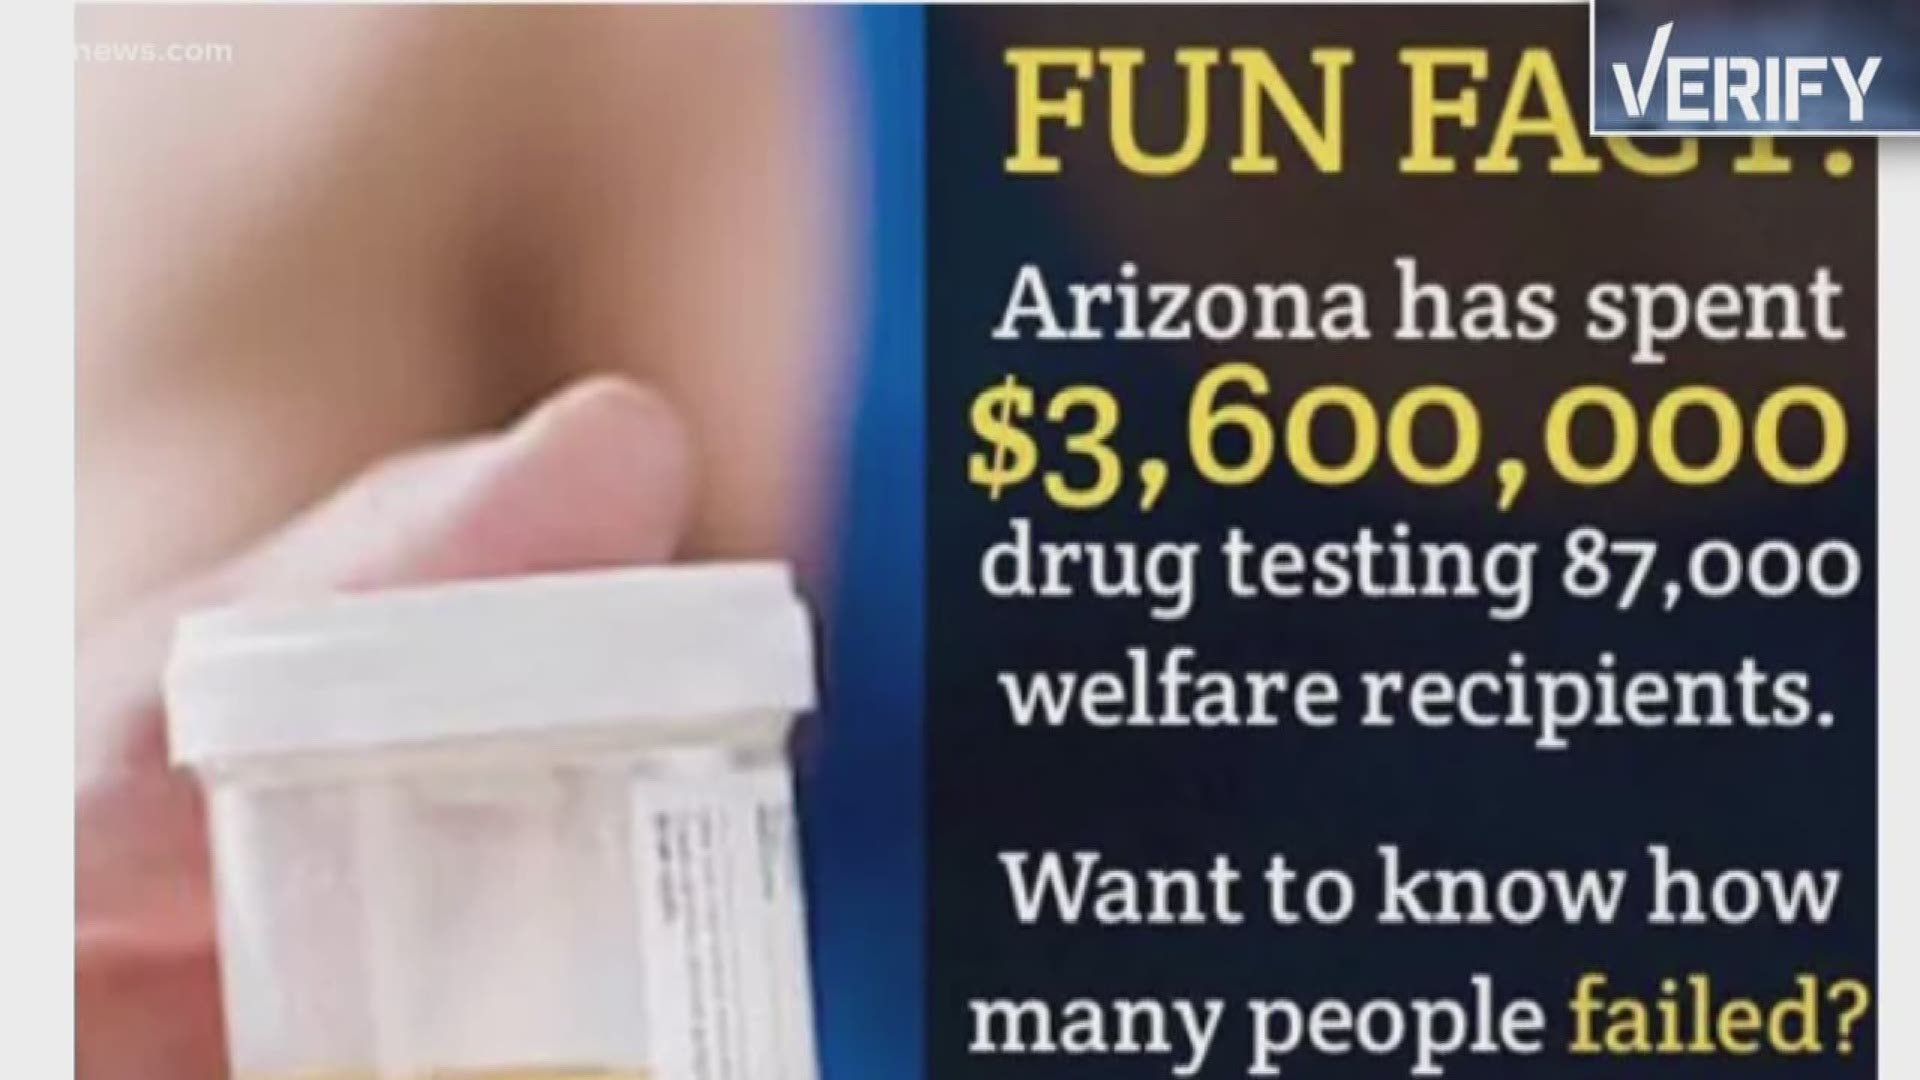 12 News verifies: Are millions being spent on drug testing in Arizona, with only one person failing? There's a post going around on social media making that starling claim.